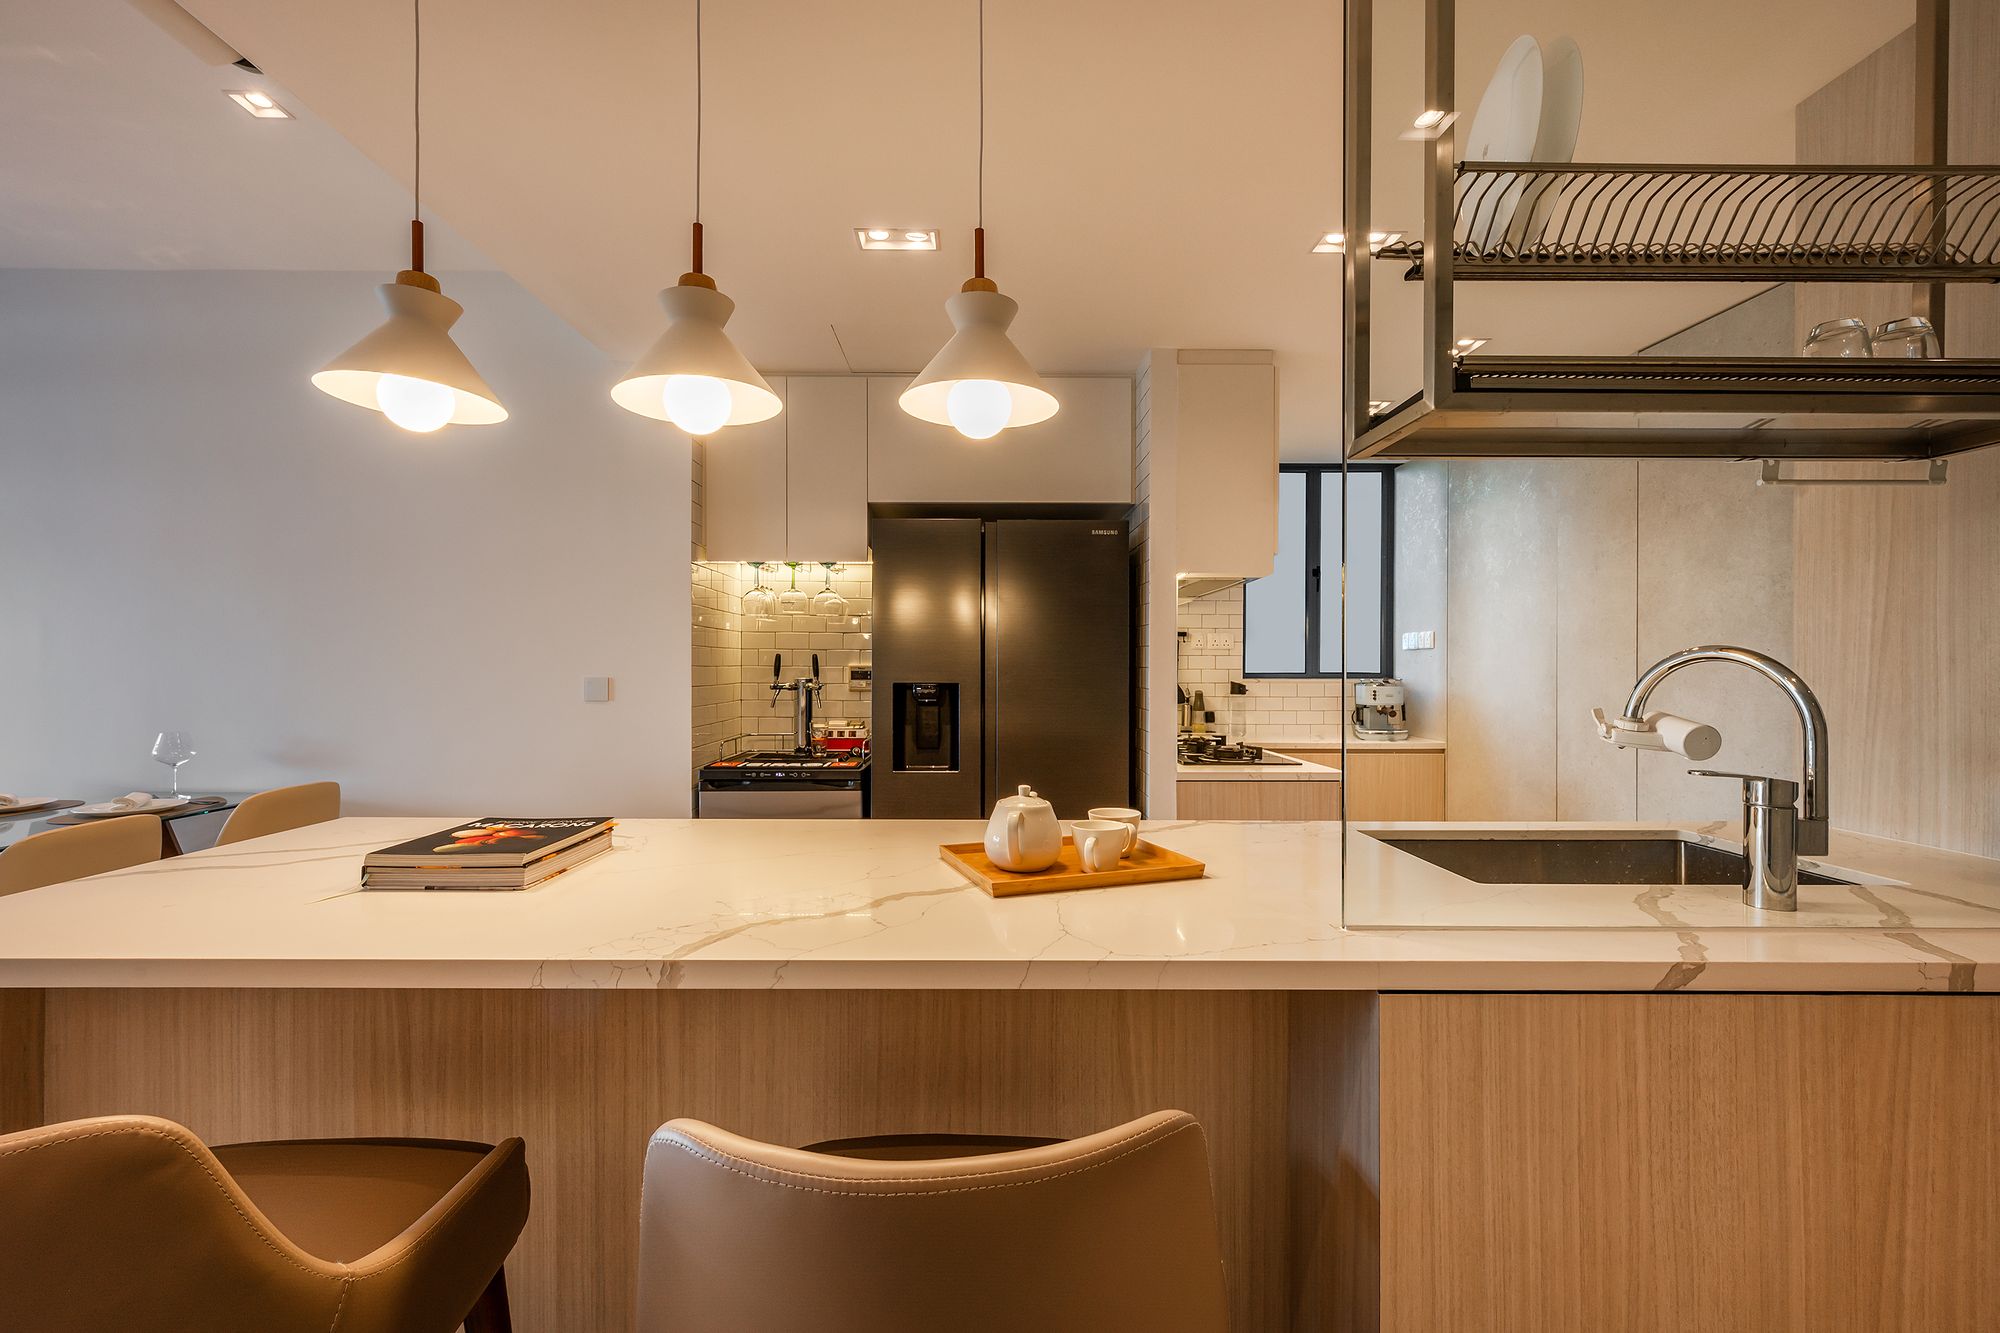 Ambient light to create a moody breakfast counter; Blue Horizon condo, by Shan Wong